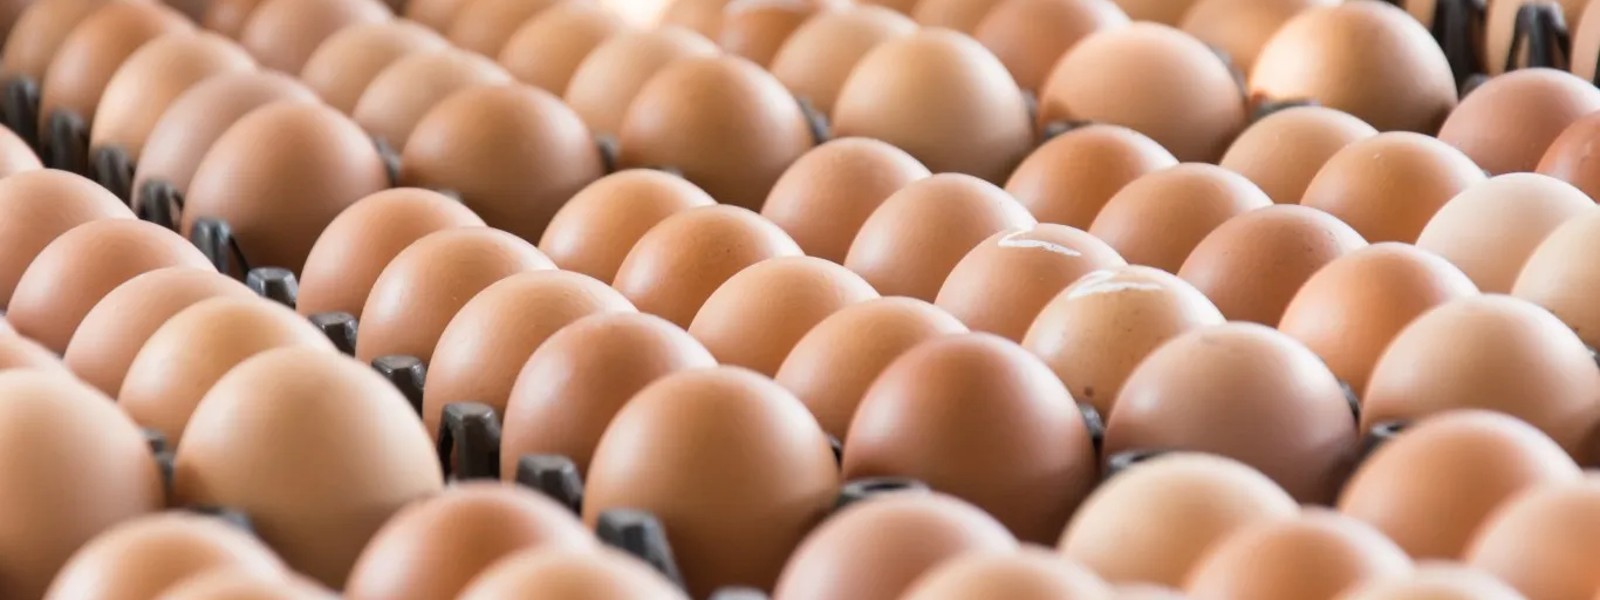 Eggs imported from India sent for testing